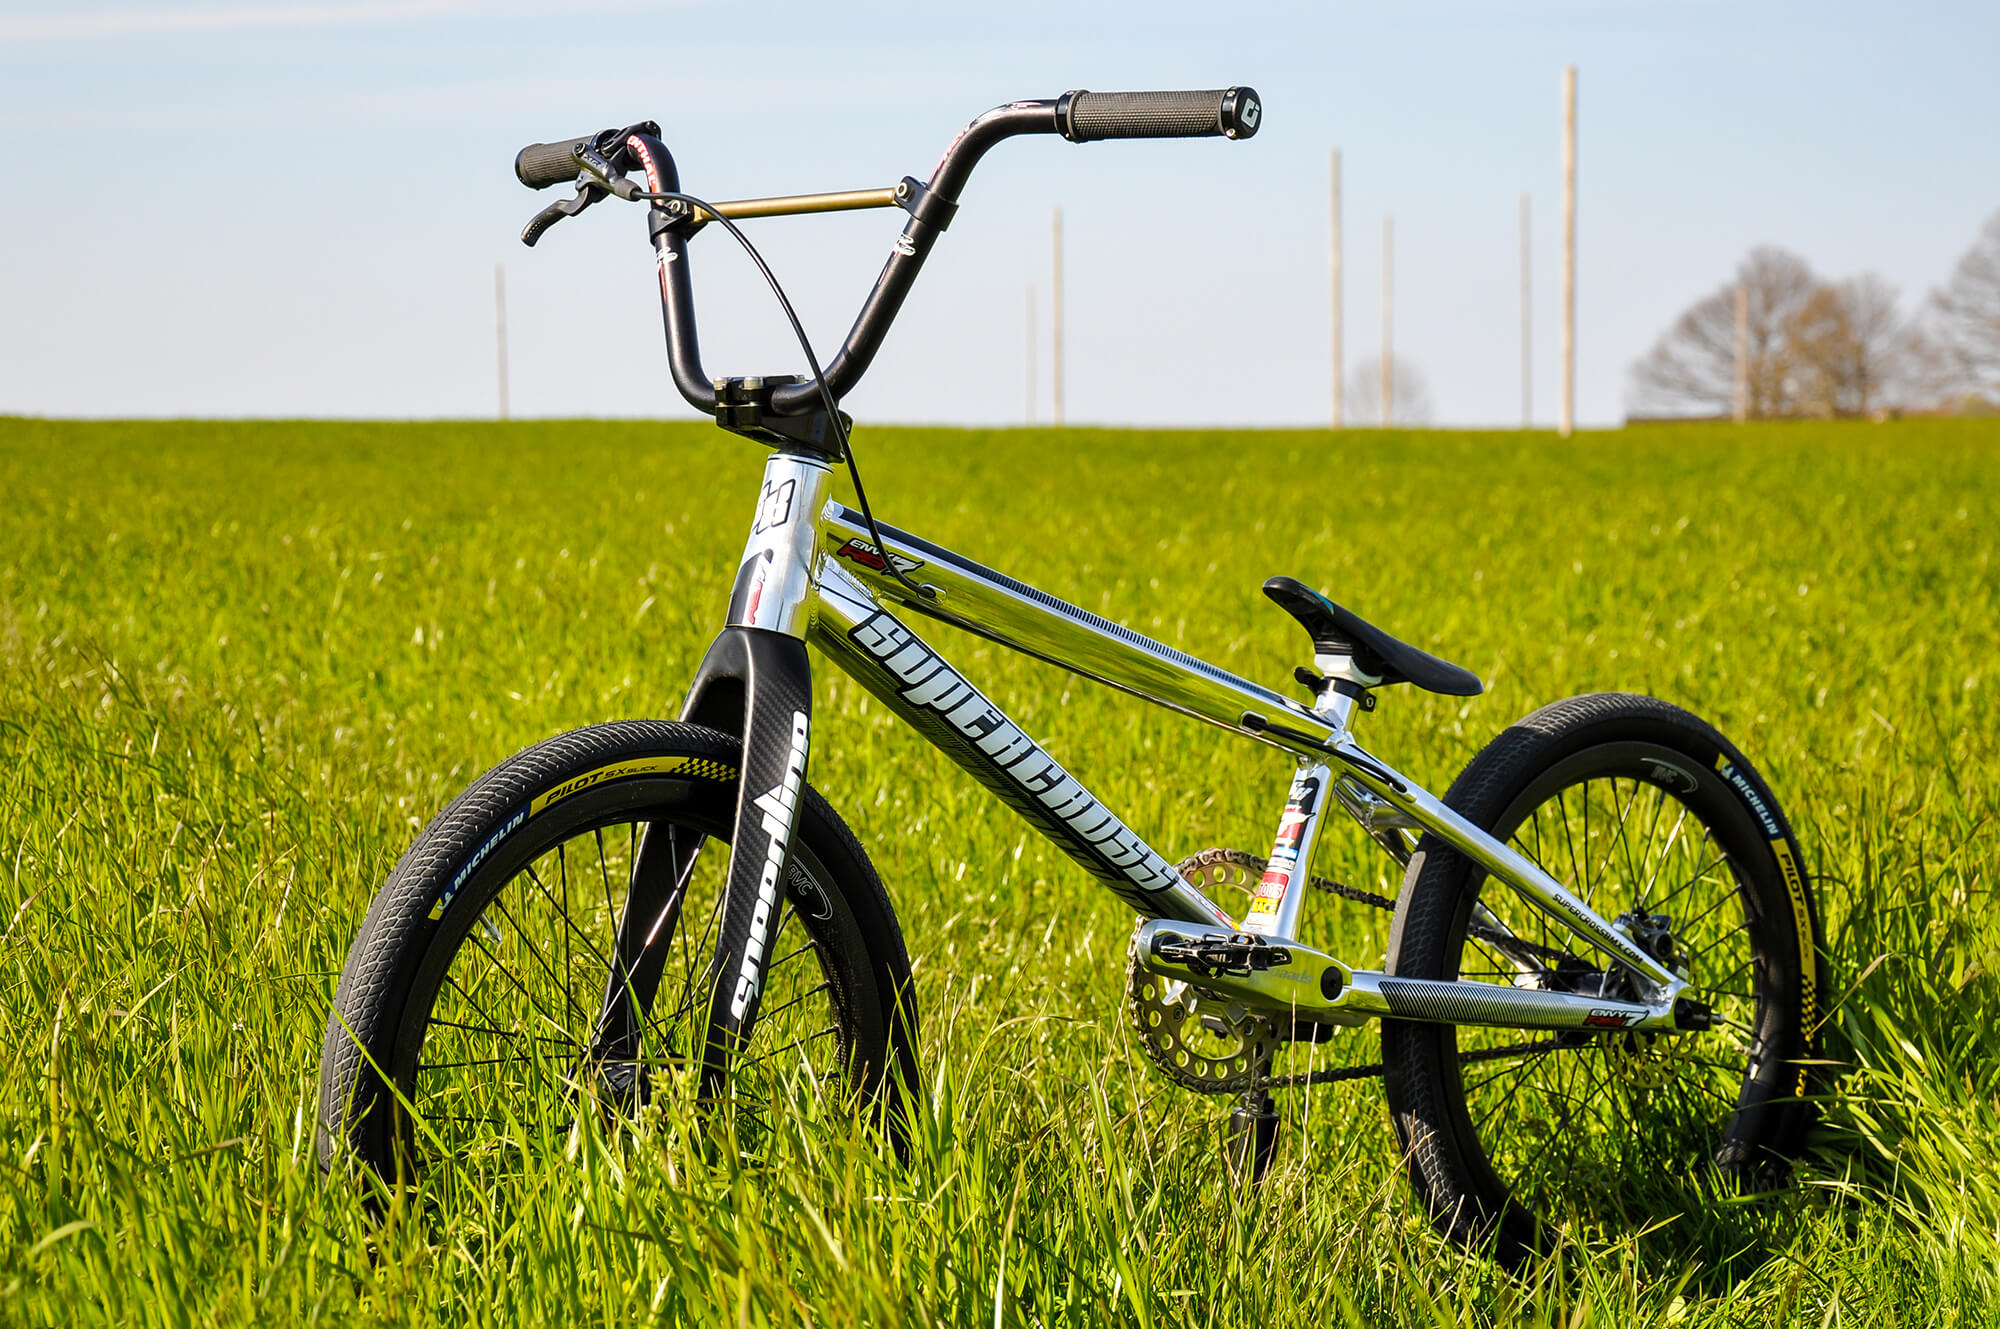 Robyn Gommers Supercross RS7 Bike Check April 2021 - Fifteen BMX